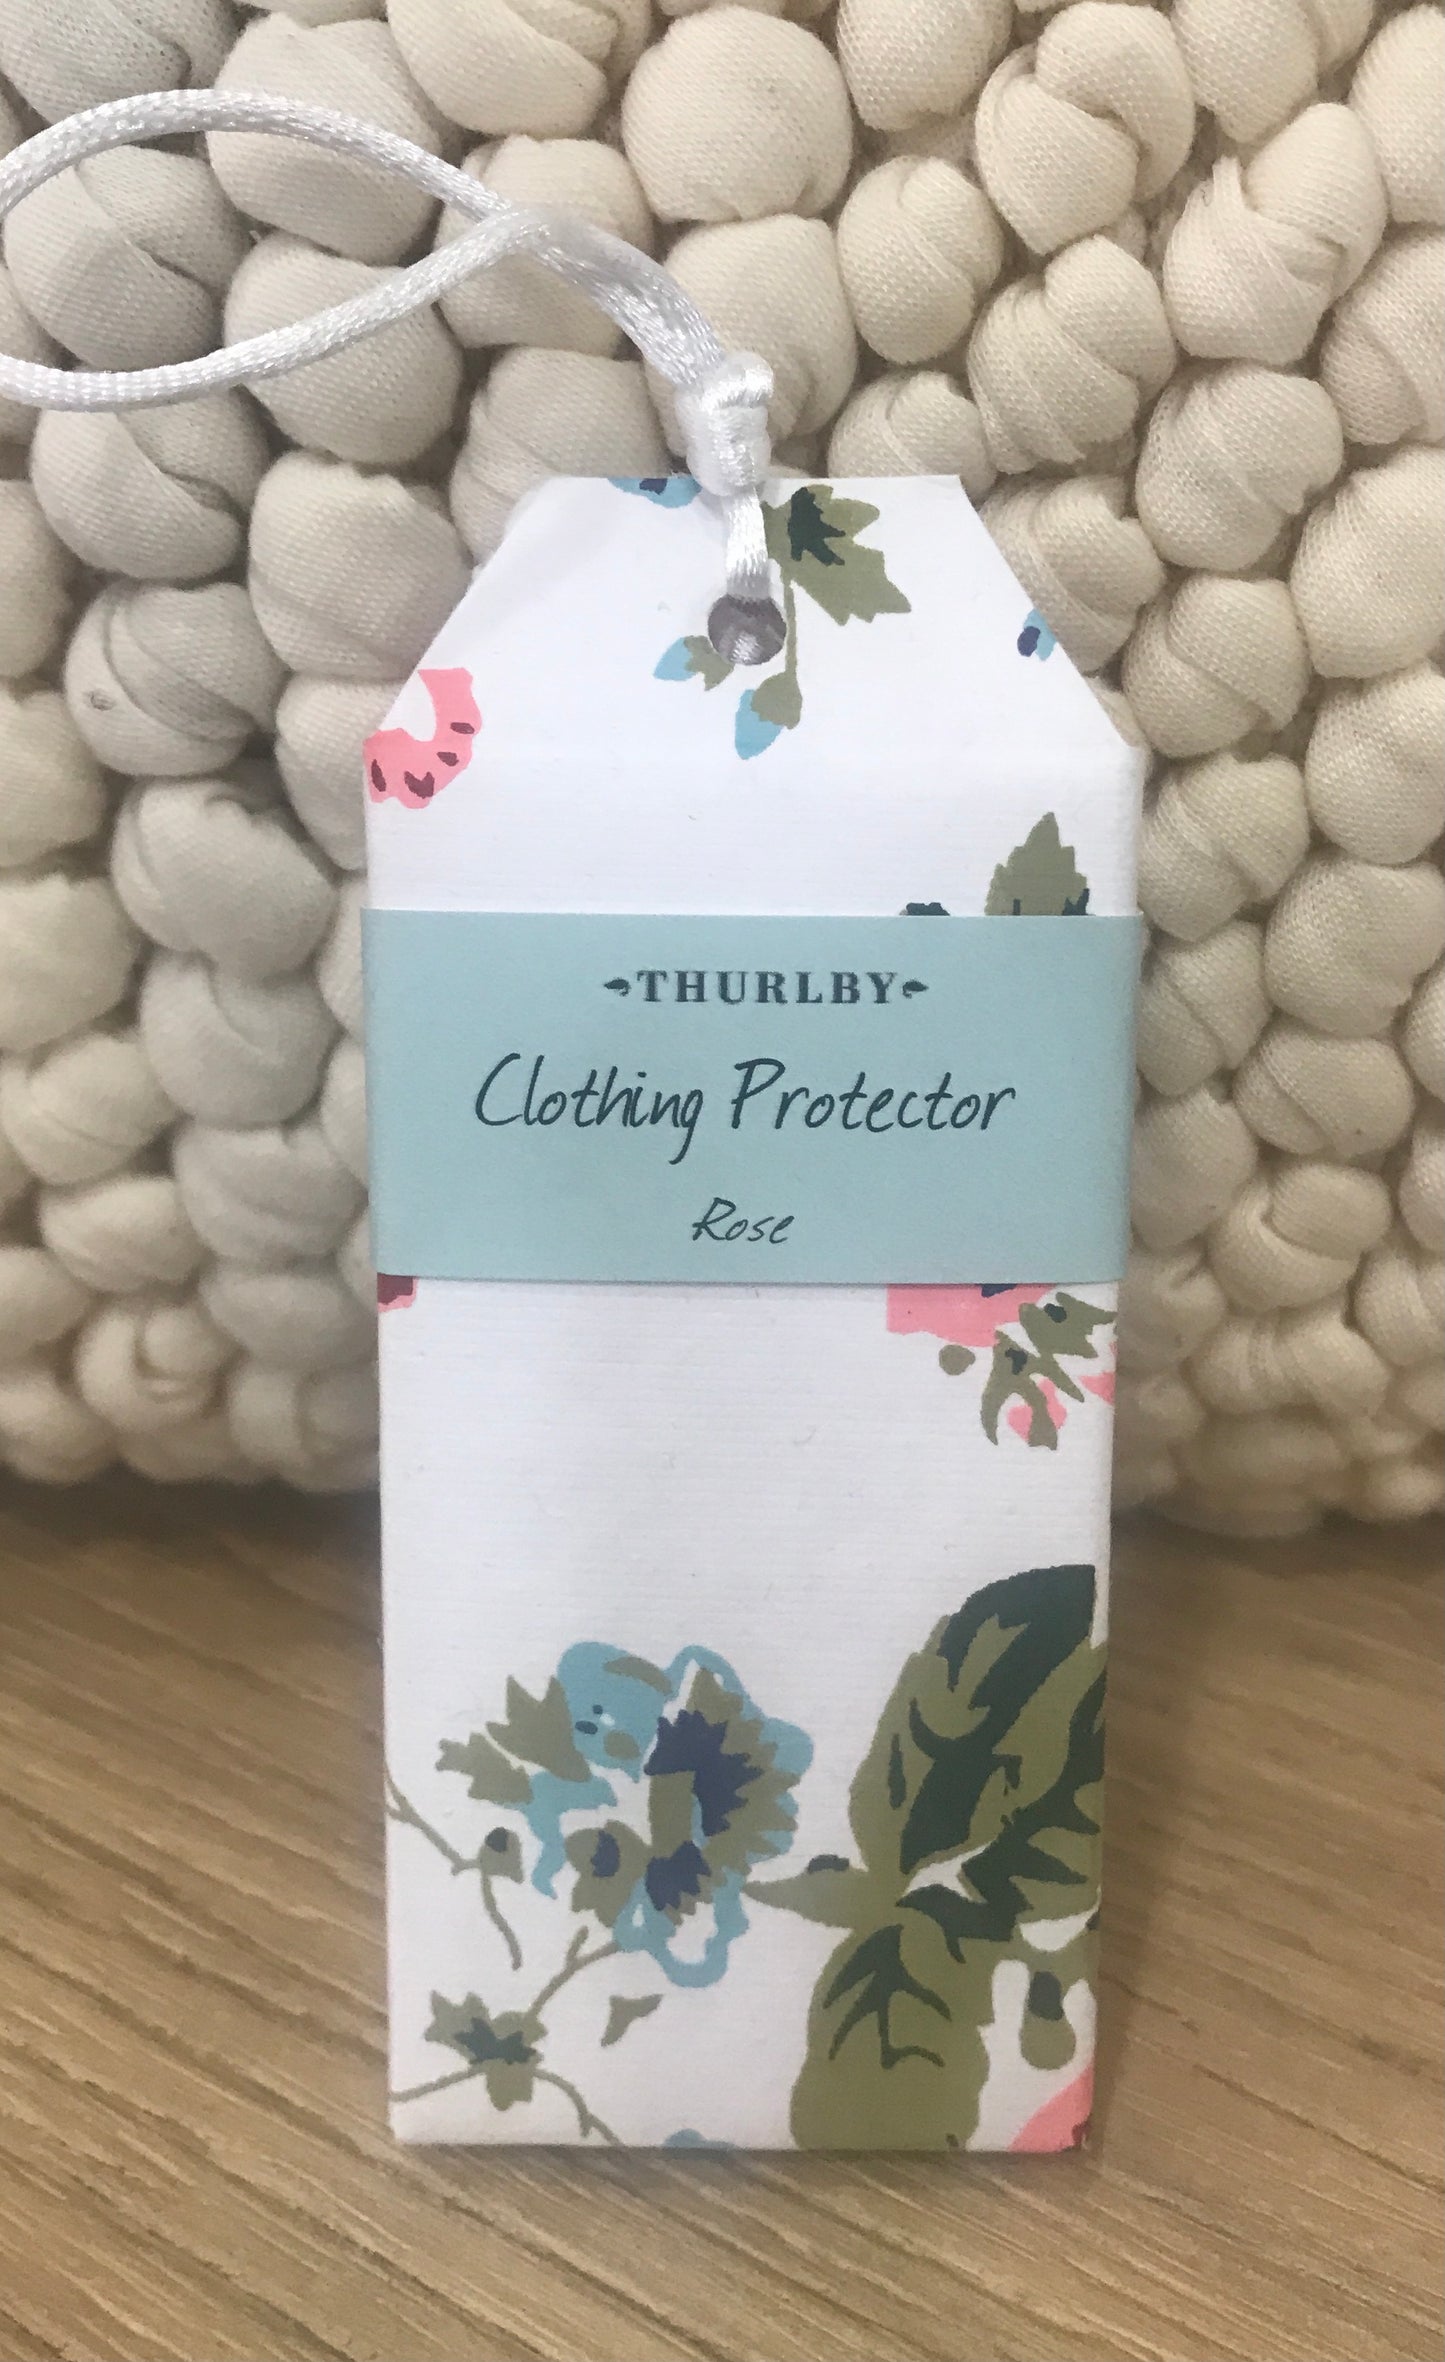 Clothing Protector - Thurlby